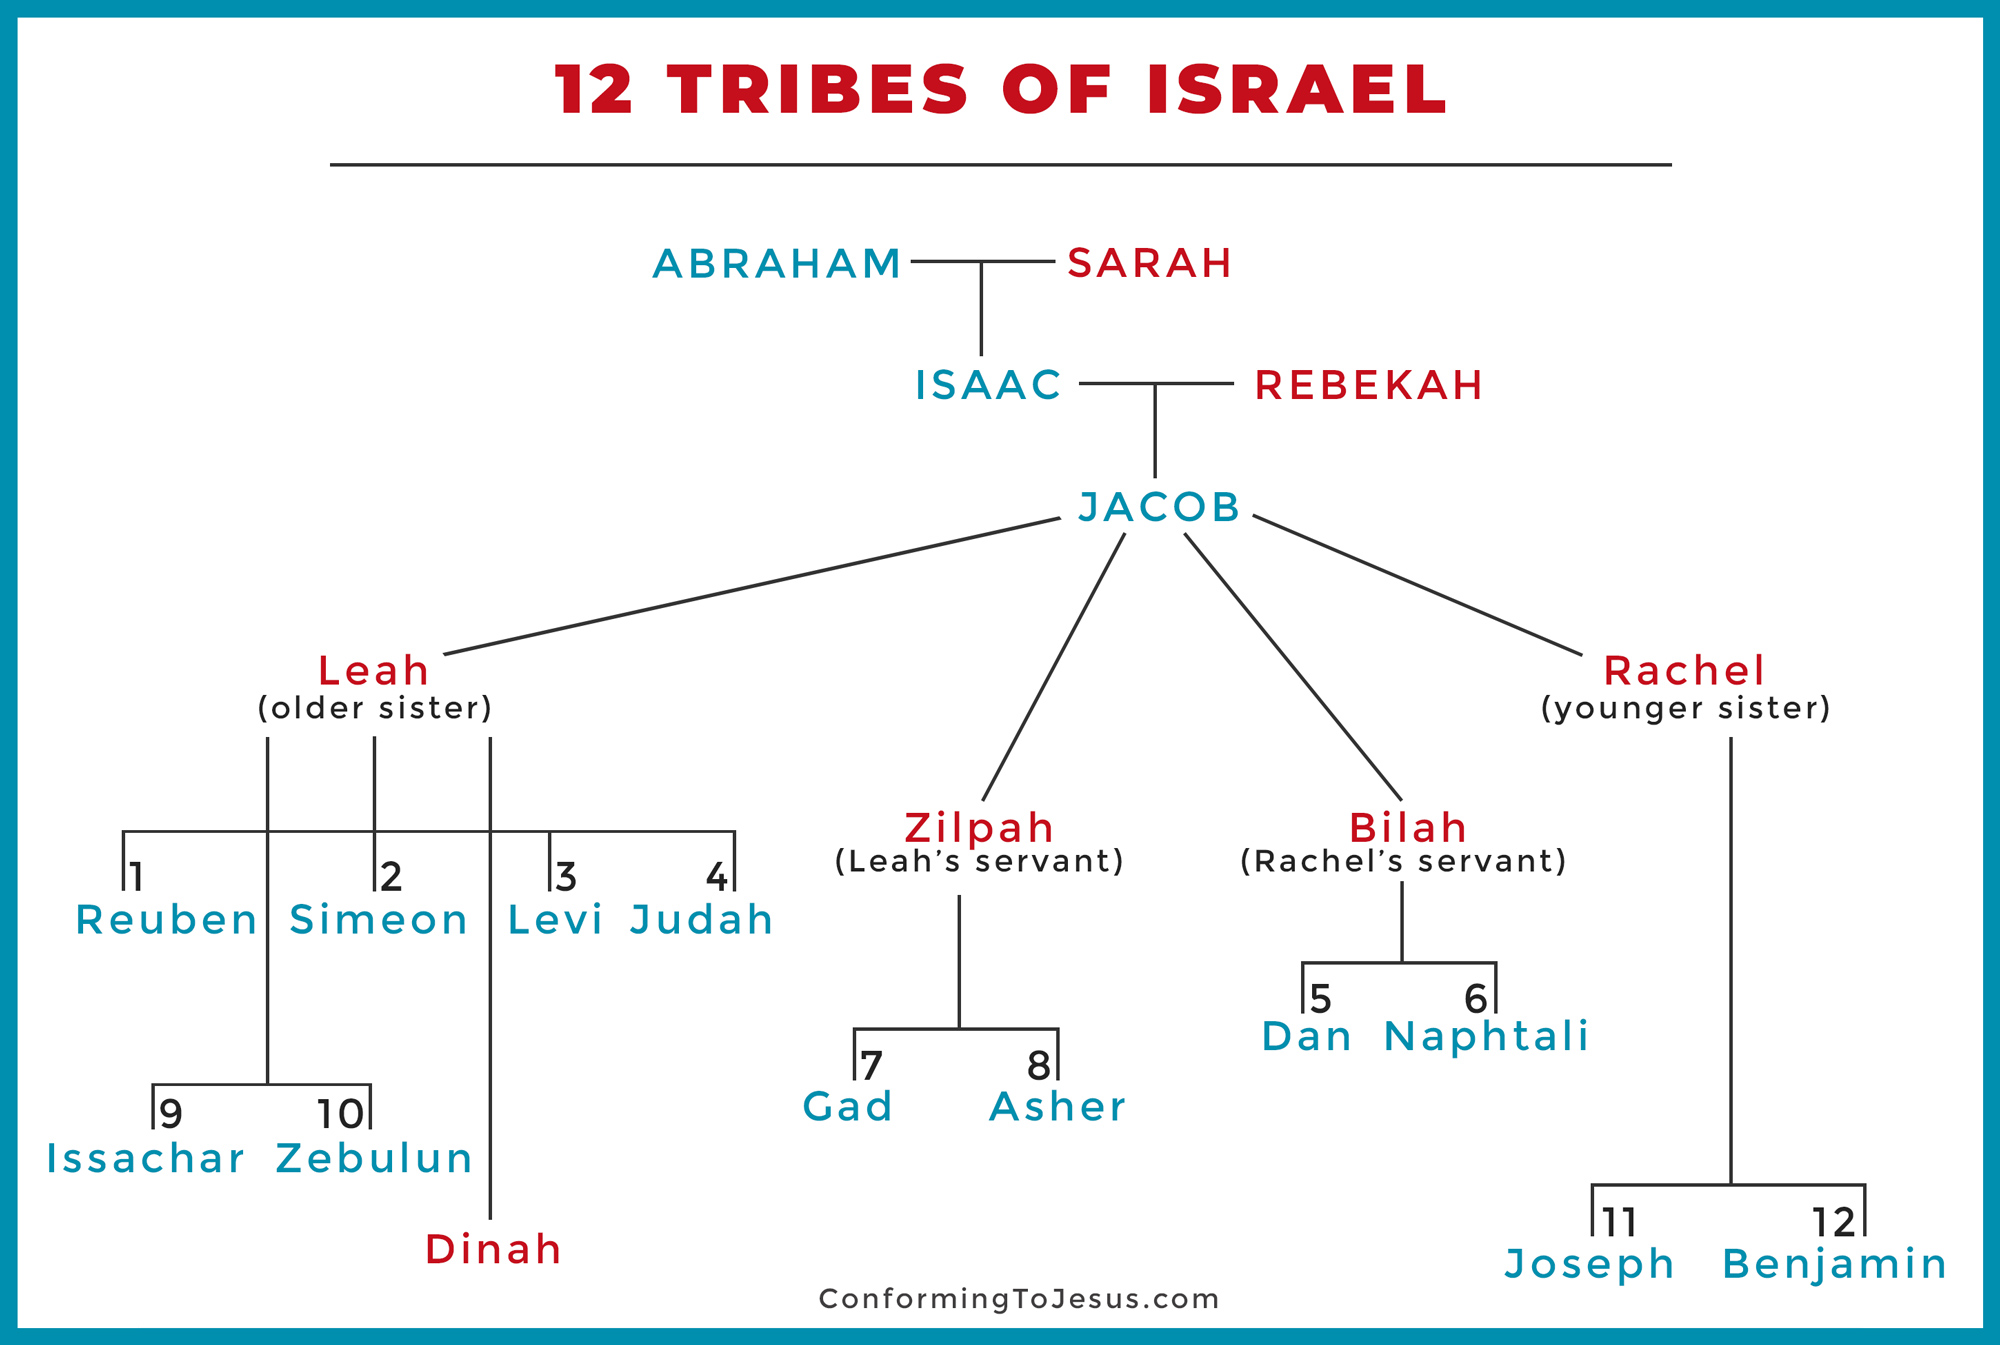 12 Tribes of Israel Chart - Jacob's 12 Sons & Patriarchs